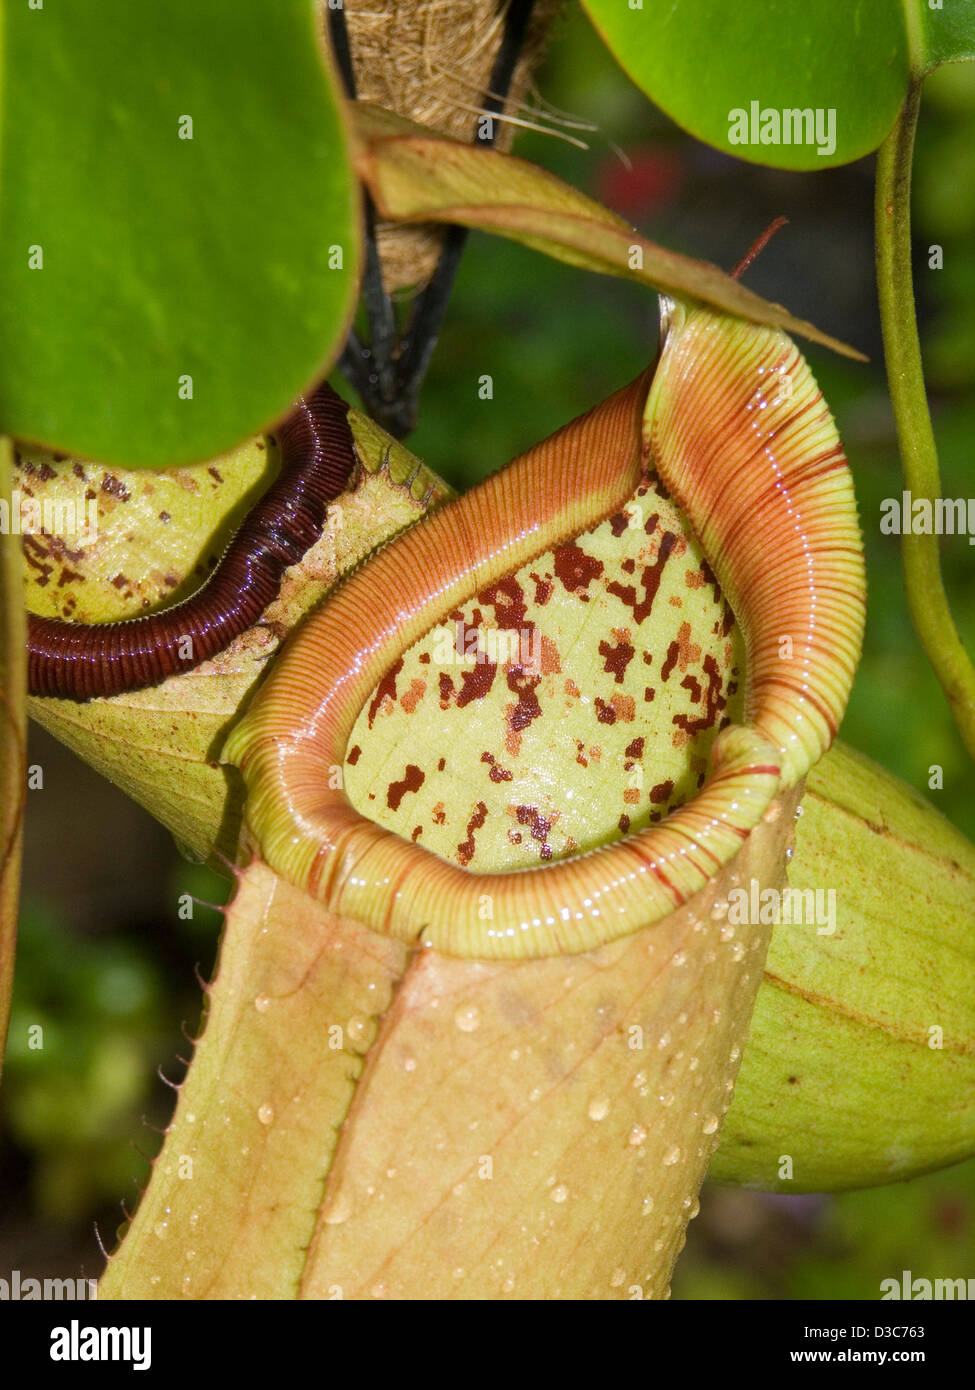 Large hanging pitcher and gaping mouth of Nepenthes sibuyanensis x truncata - carnivorous pitcher plant freckled with raindrops Stock Photo